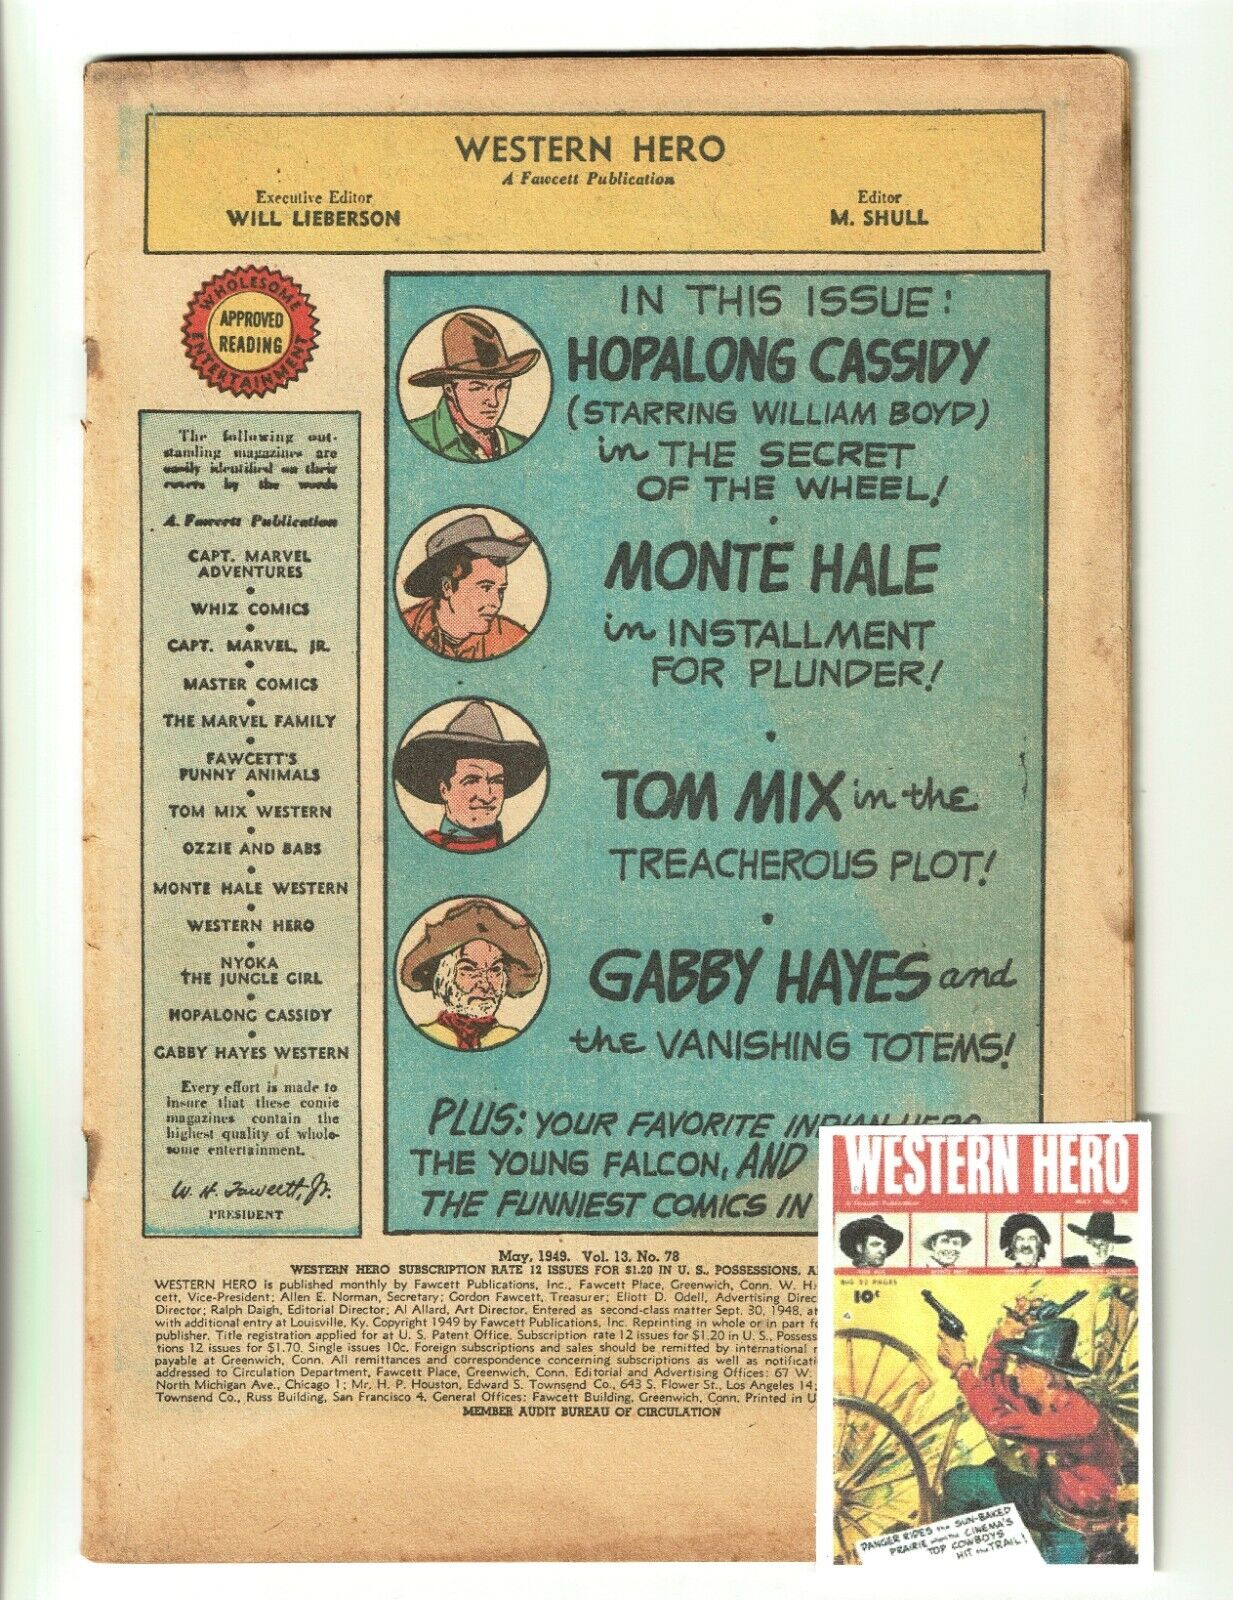 WESTERN HERO #78 1949 48 Page Coverless Comic Hopalong Cassidy Tom Mix